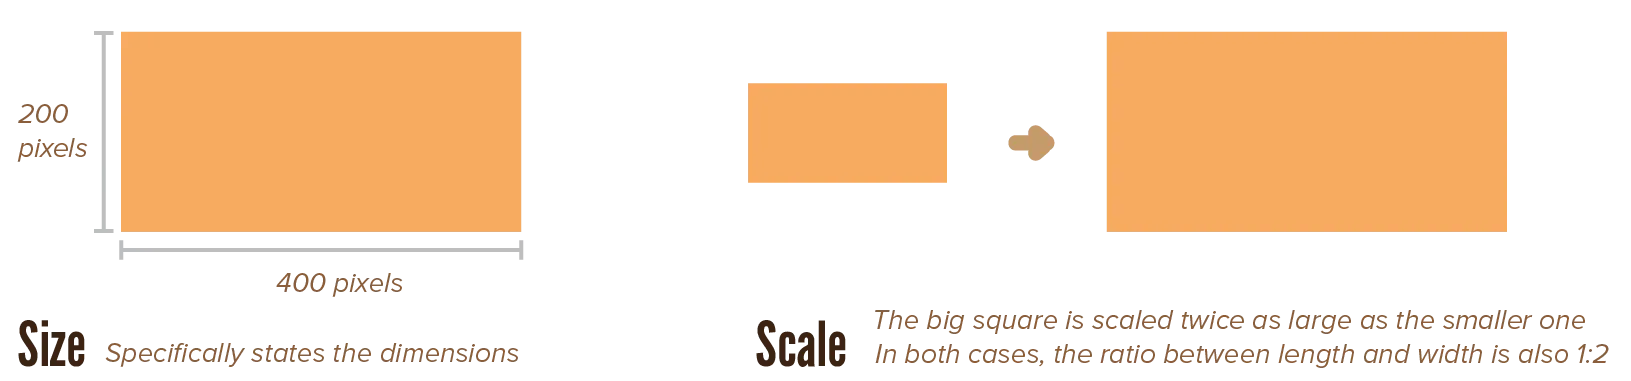 Example of scale versus size.